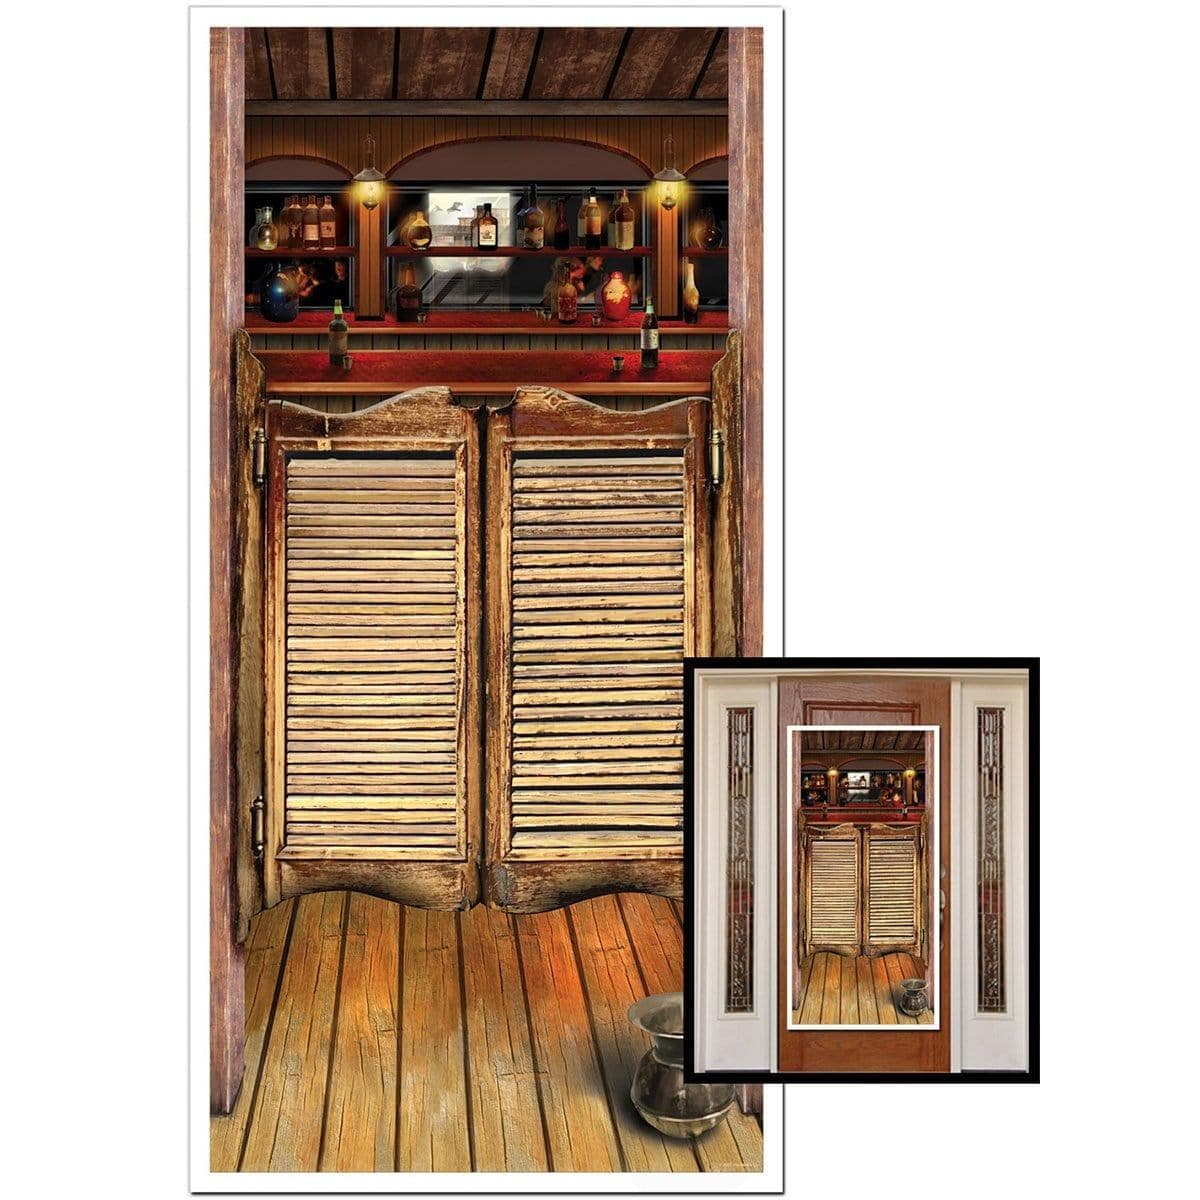 Buy Theme Party Saloon Door Decoration sold at Party Expert